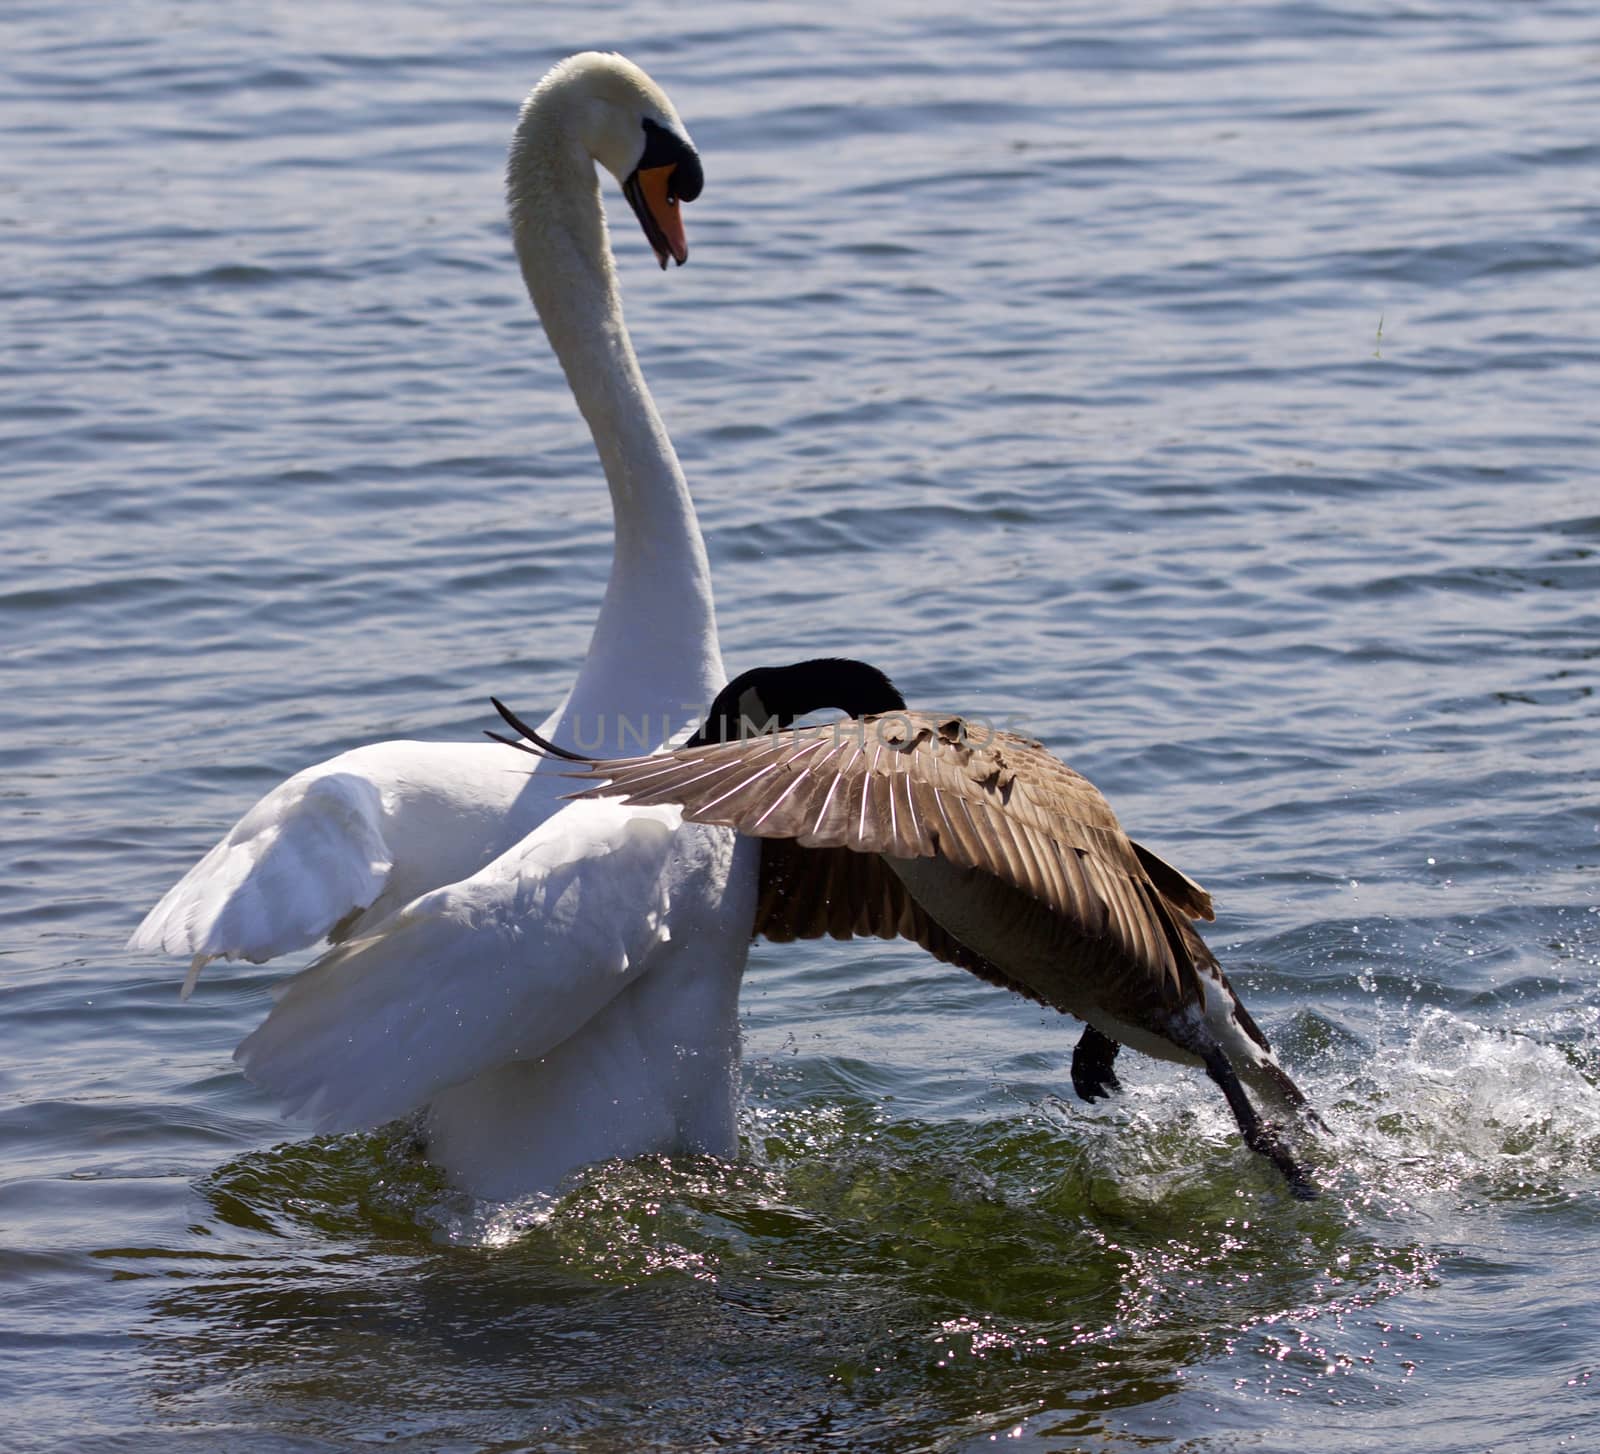 Amazing image of the epic fight between the Canada goose and the swan by teo